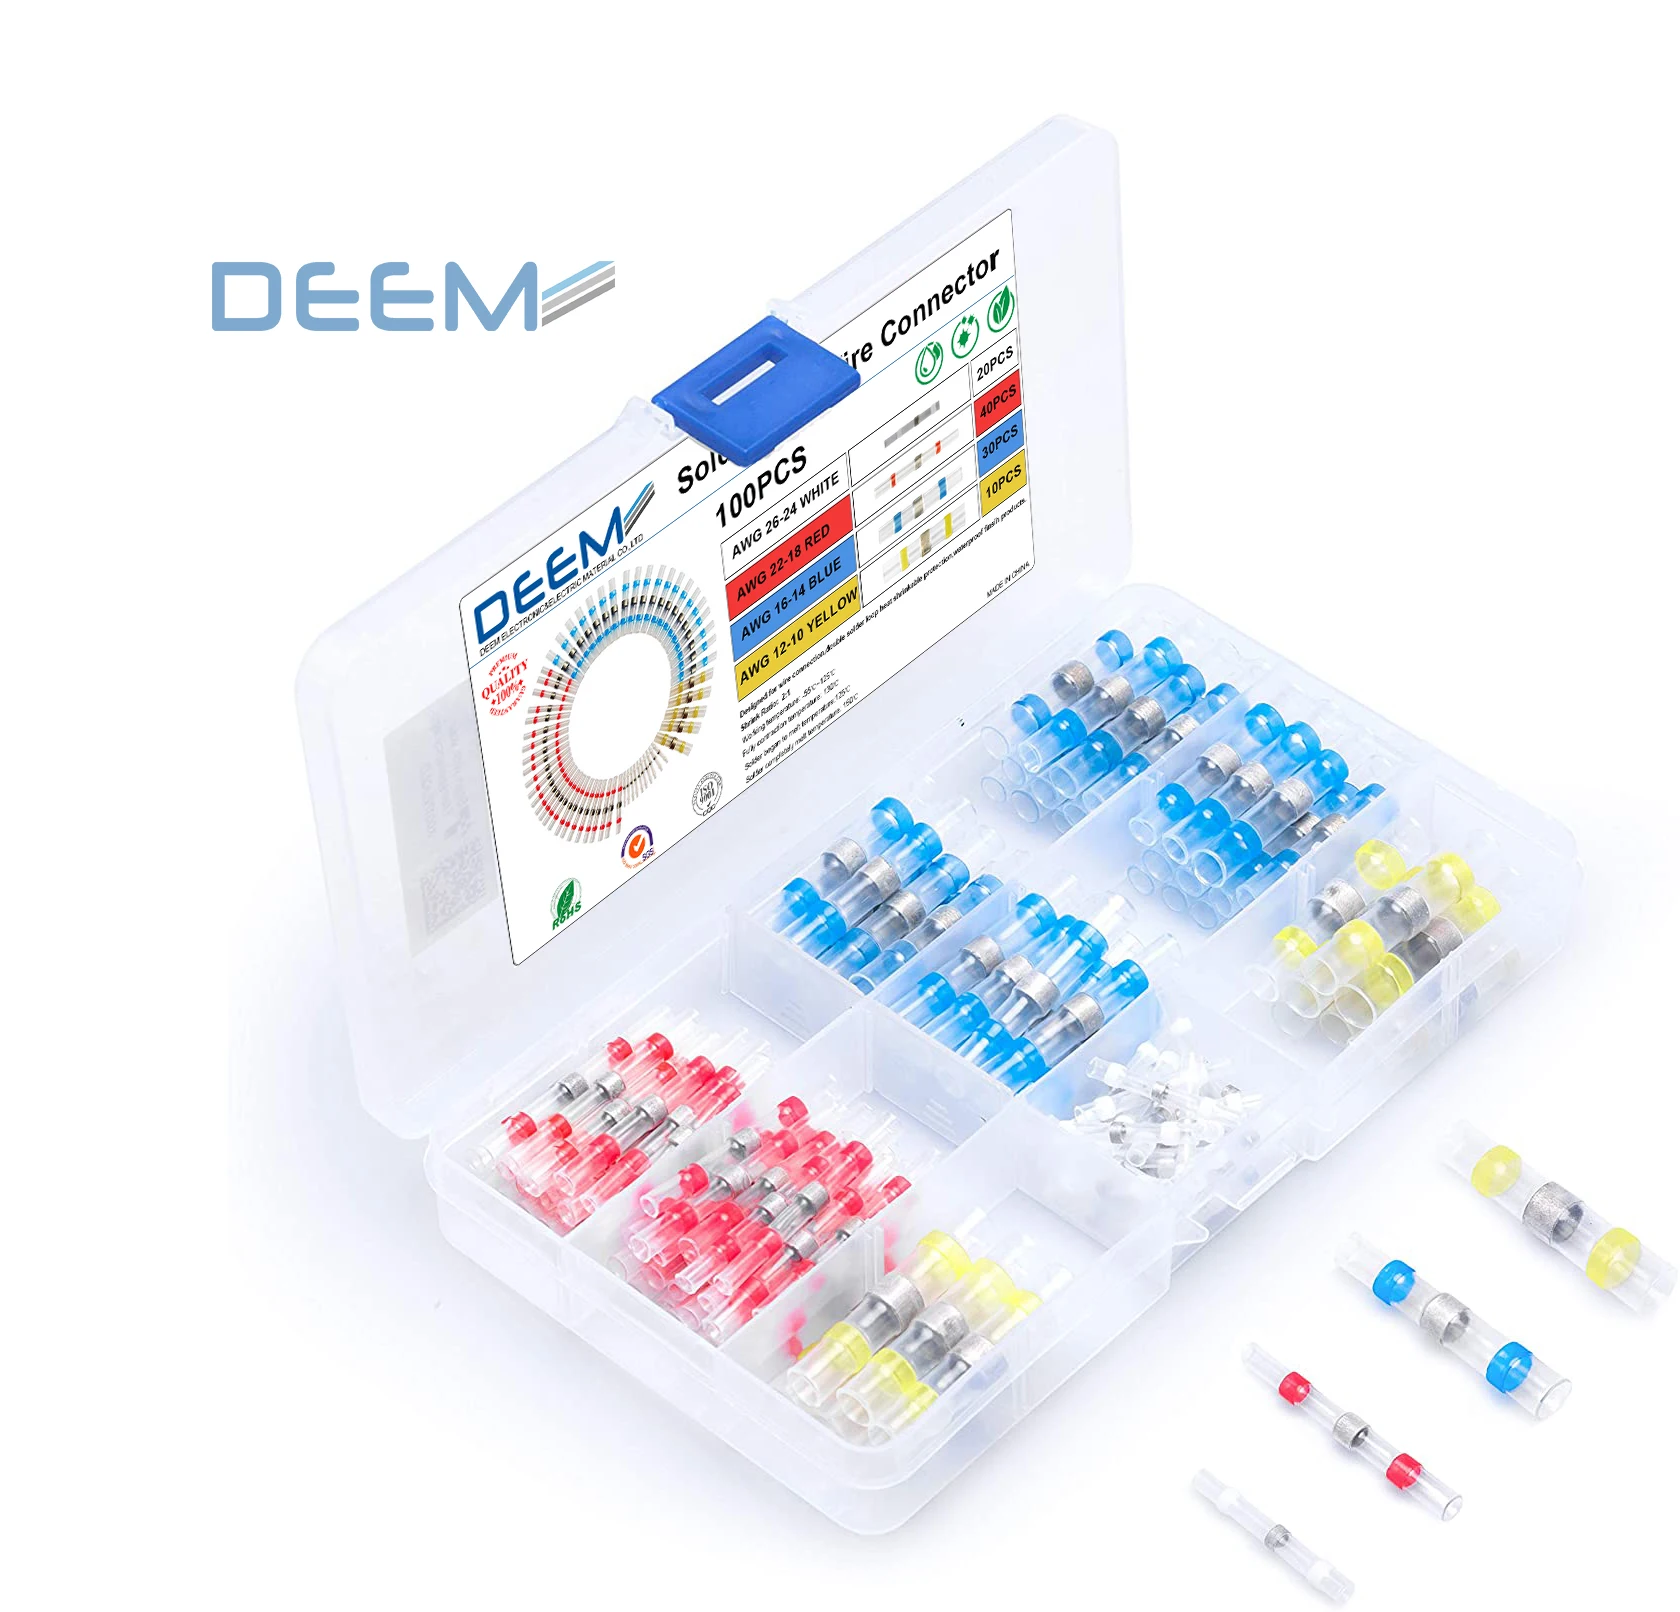 

DEEM 100 PCS BEST Quality automotive electric connectors solder seal wire connector for cable insulation and protection